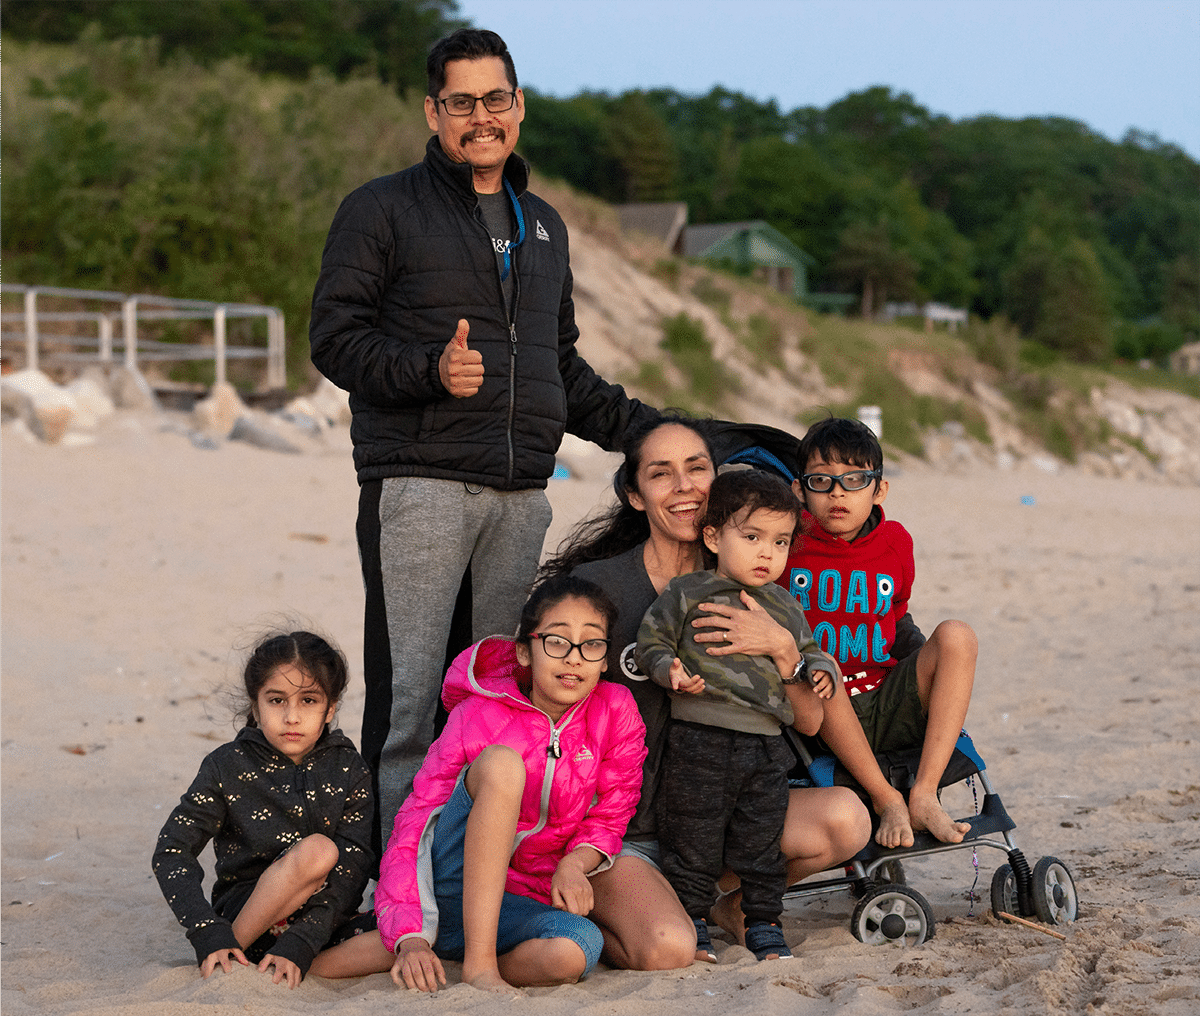 The Rojas family at the beach sitting on the sand, all smiling at the camera.